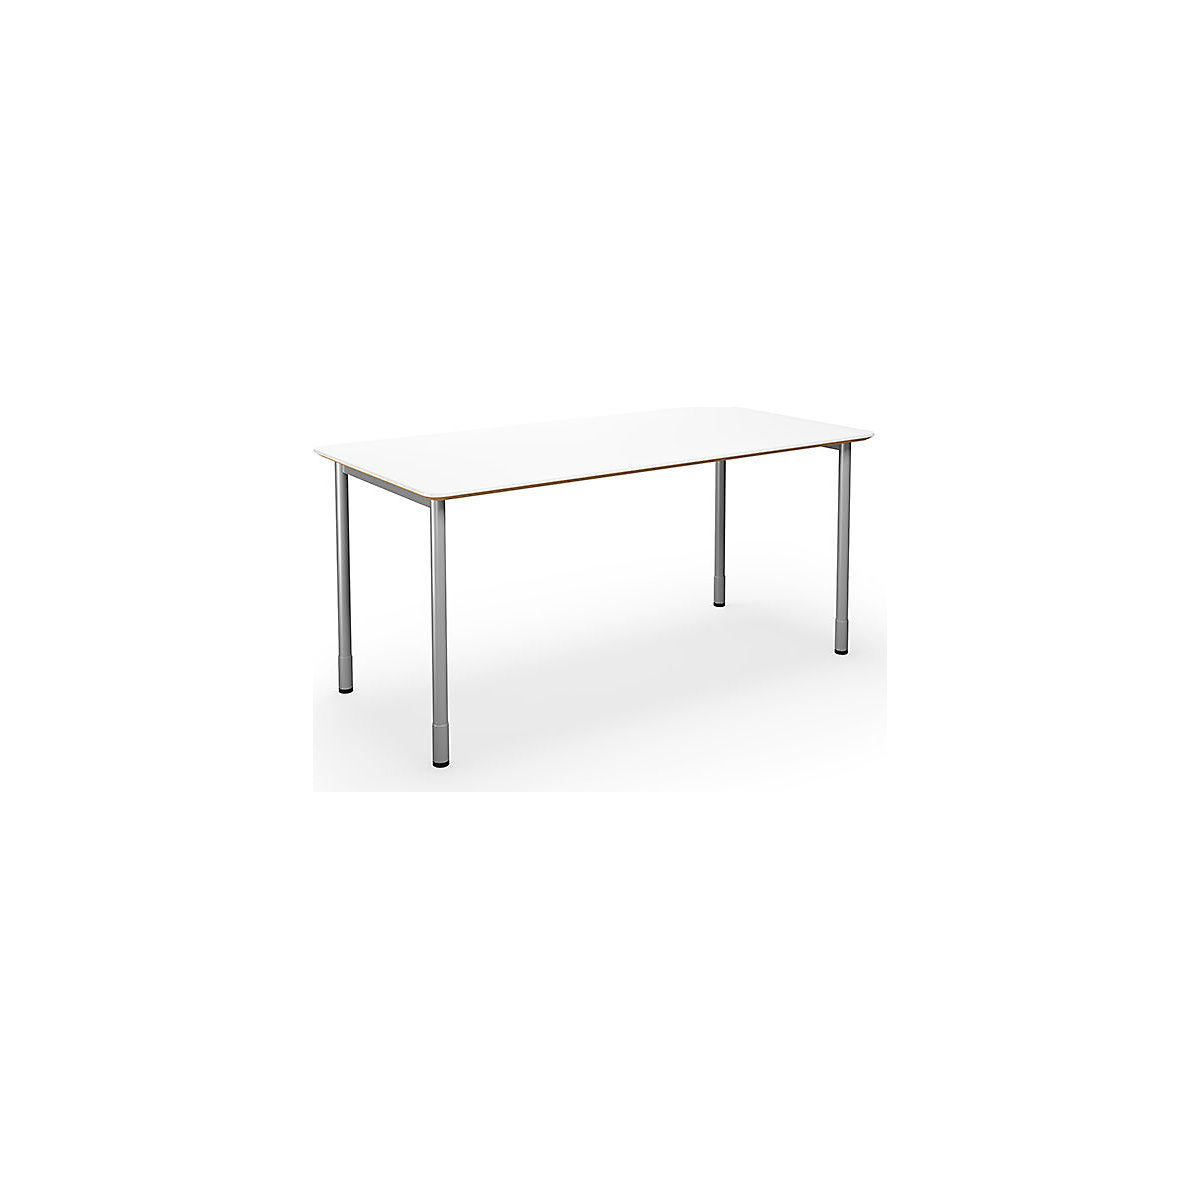 DUO-C Trend multi-purpose desk, straight tabletop, rounded corners, WxD 1600 x 800 mm, white, silver-1